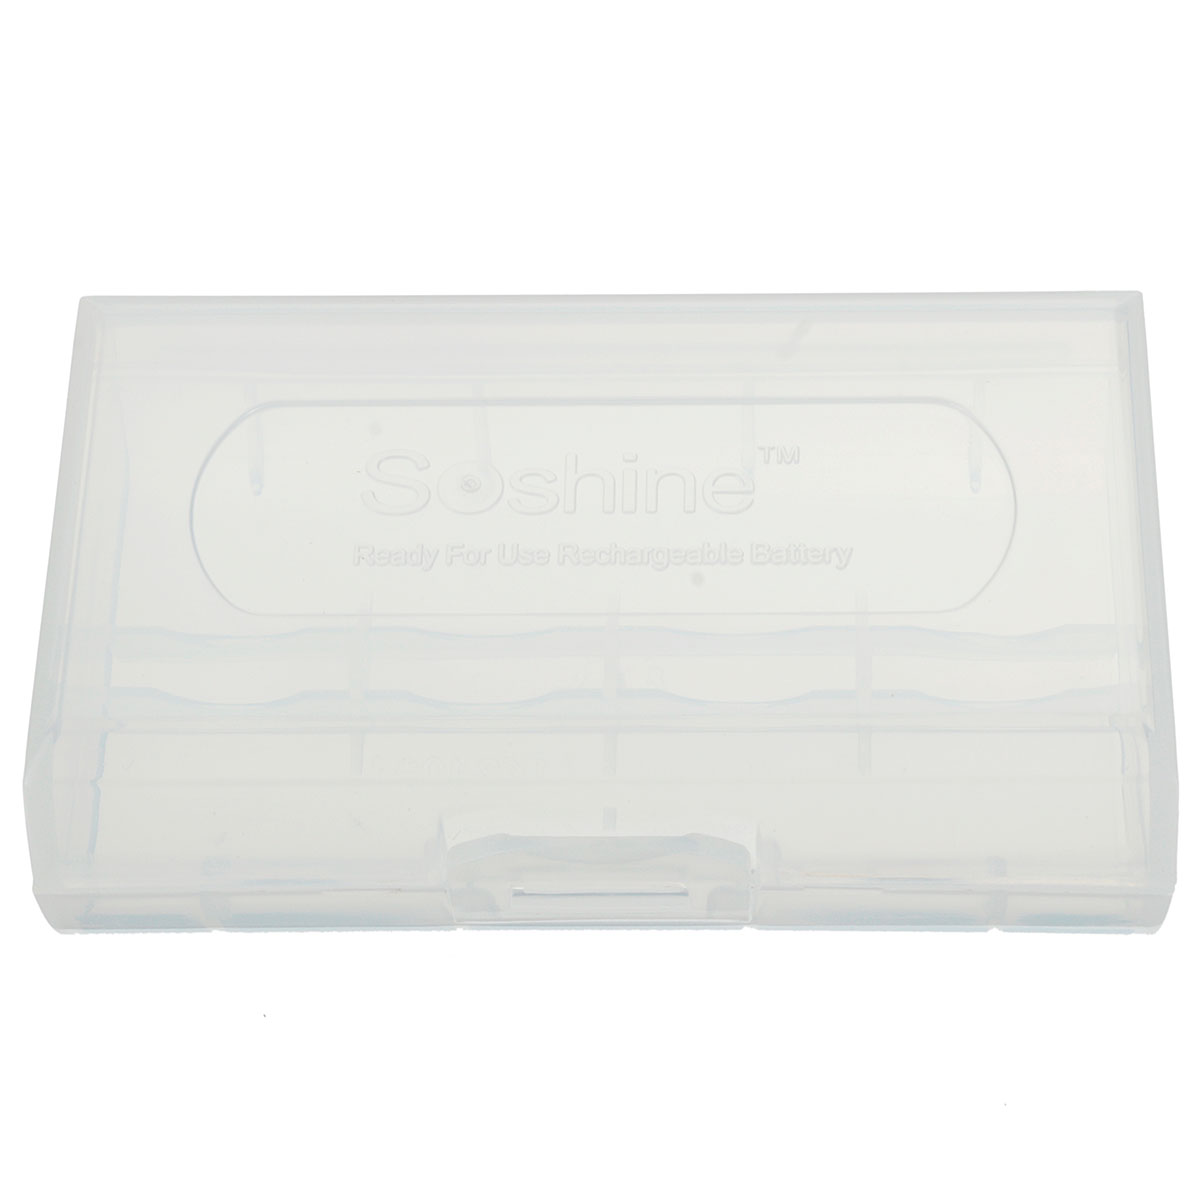 12X-Plastic-Dual-Sleeve-Cover-Case-Storage-Box-for-18650-16340CR123A-Battery-1963674-10